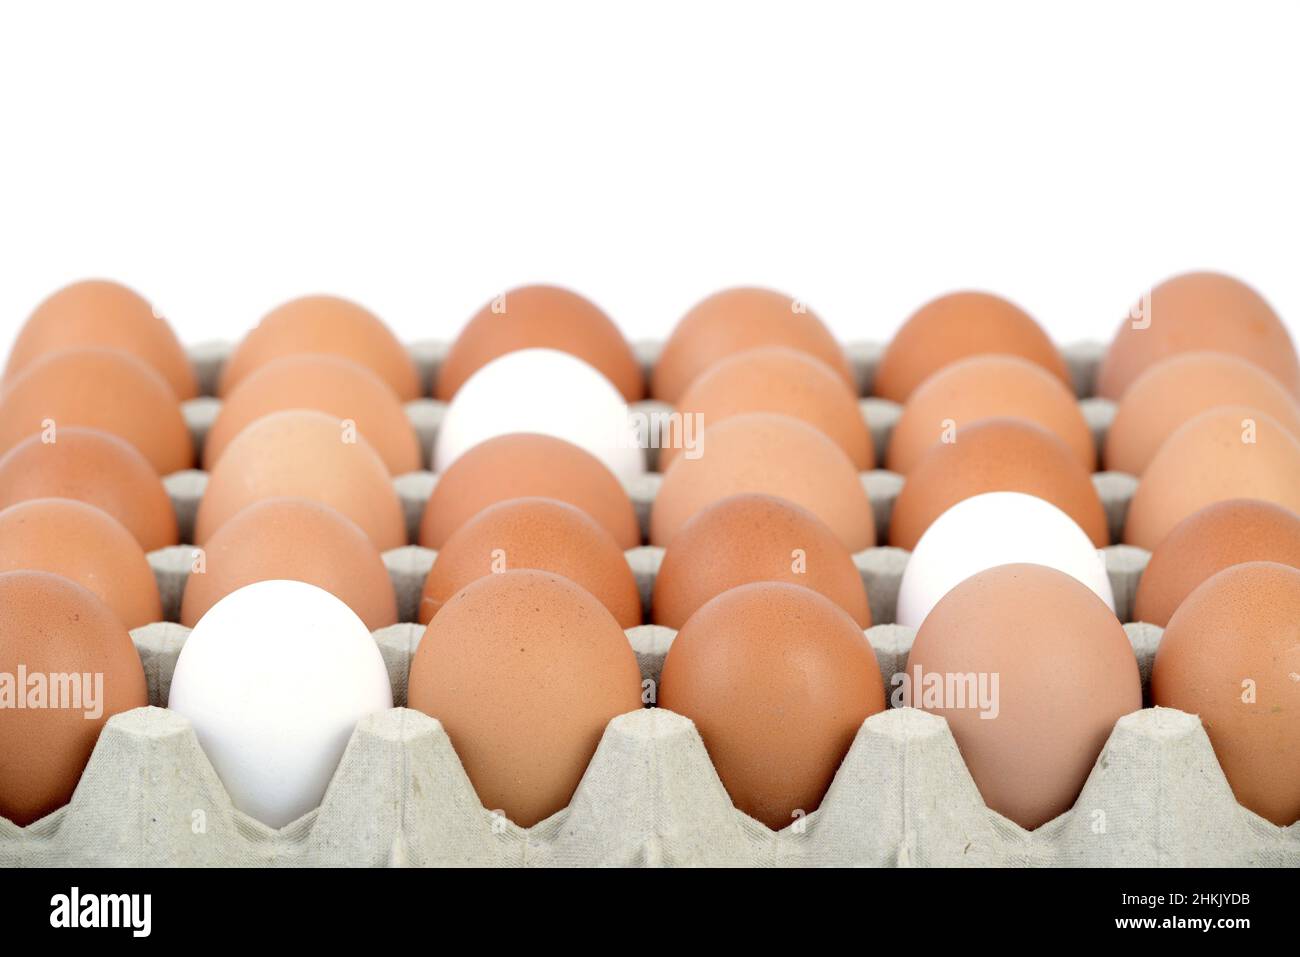 white and brown eggs together on an egg tray Stock Photo